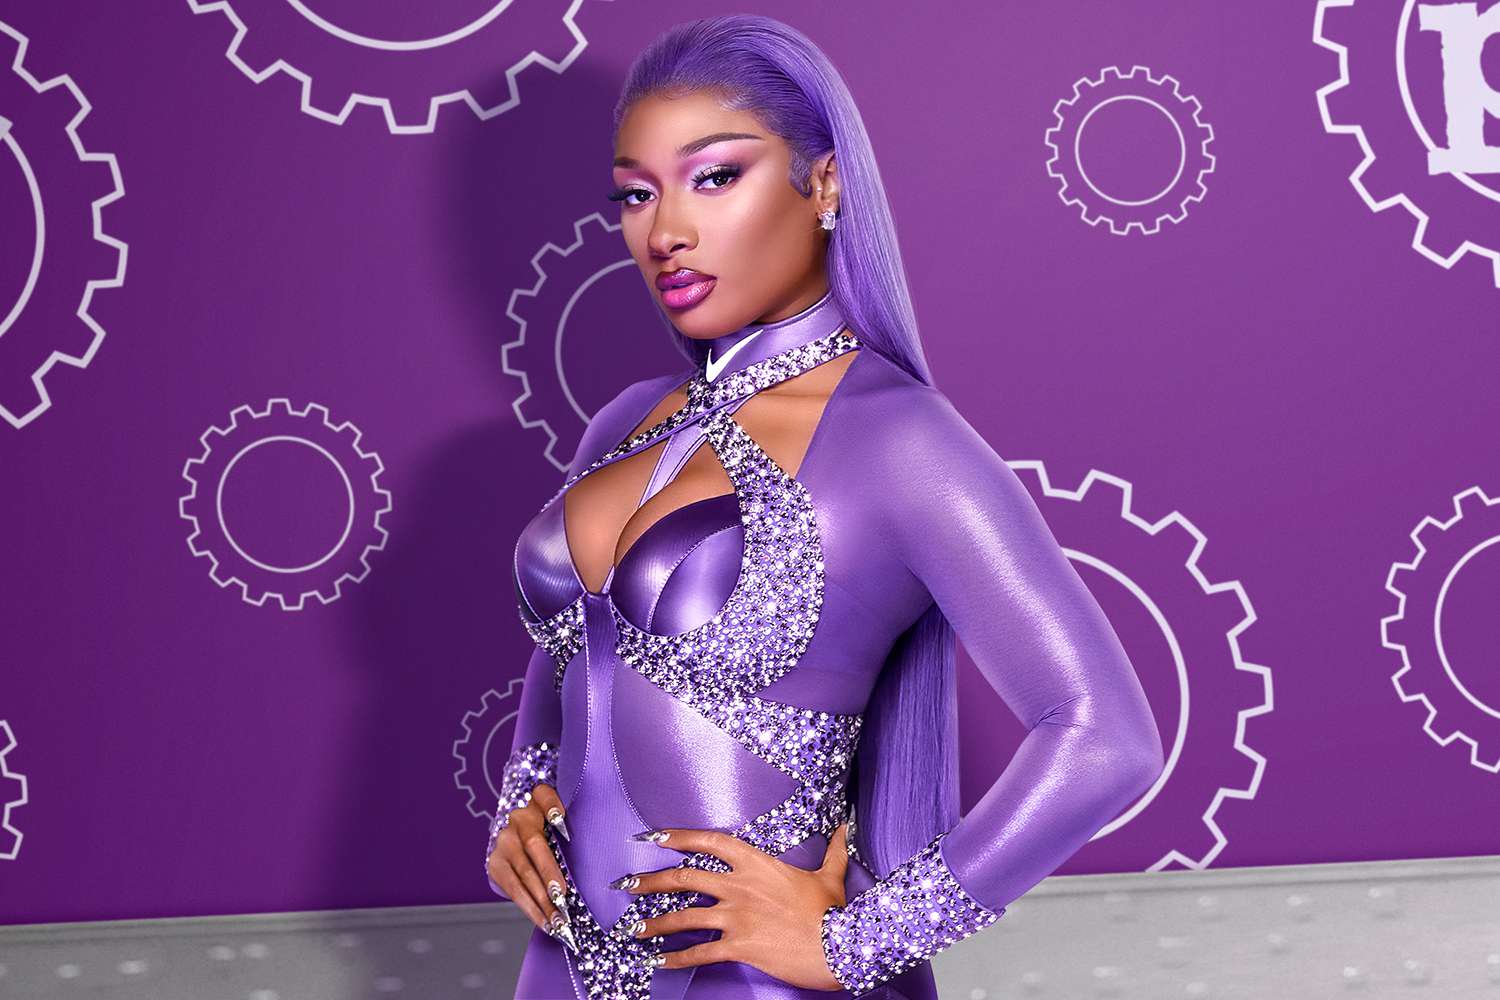 Megan Thee Stallion Faces Backlash Over ‘Megan’s Law’ Reference In New Diss Track